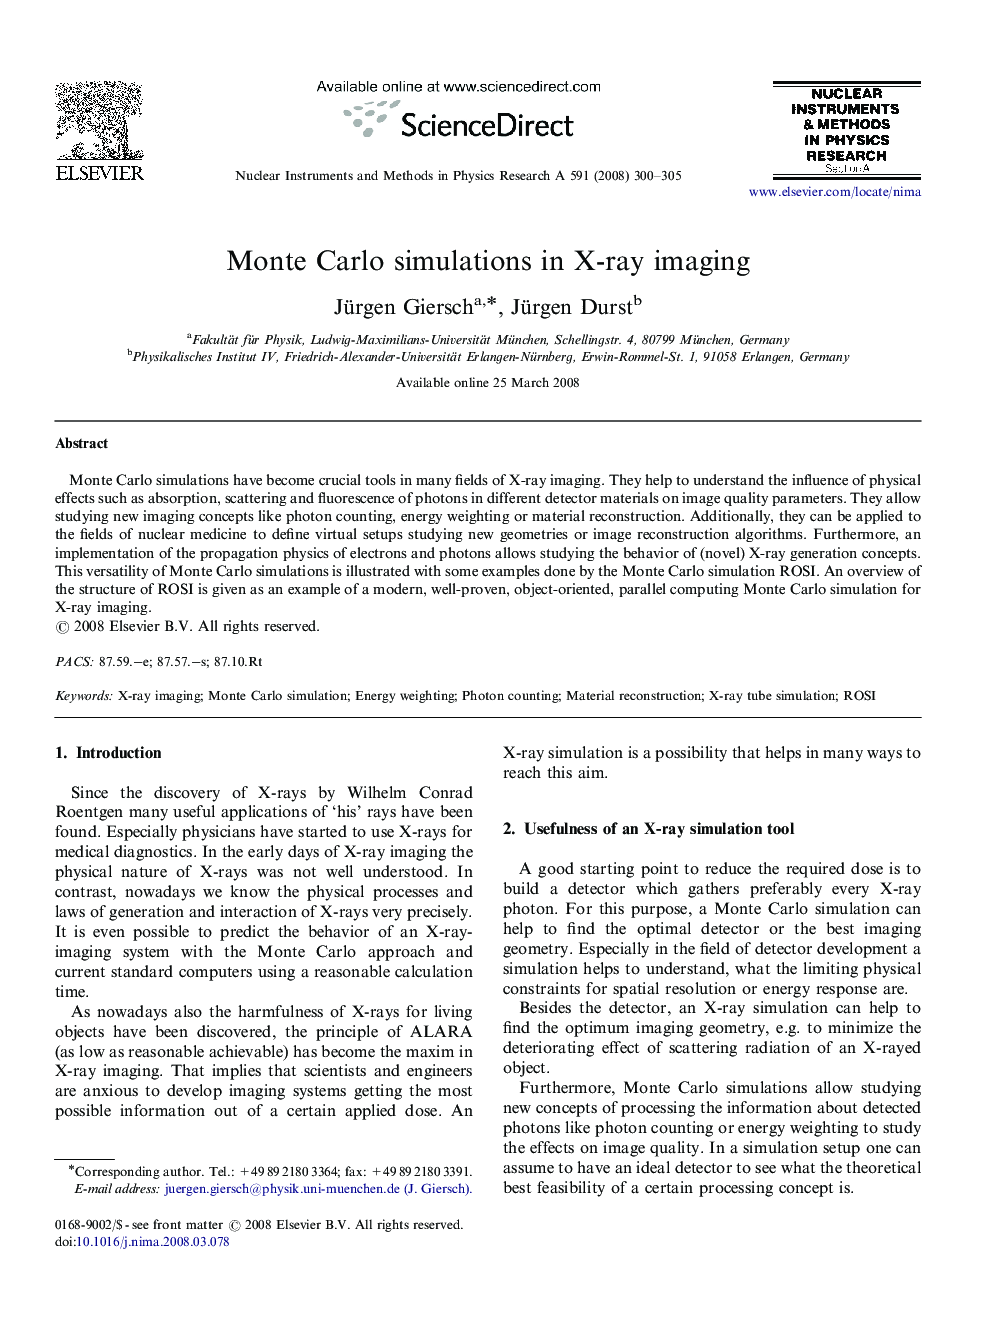 Monte Carlo simulations in X-ray imaging